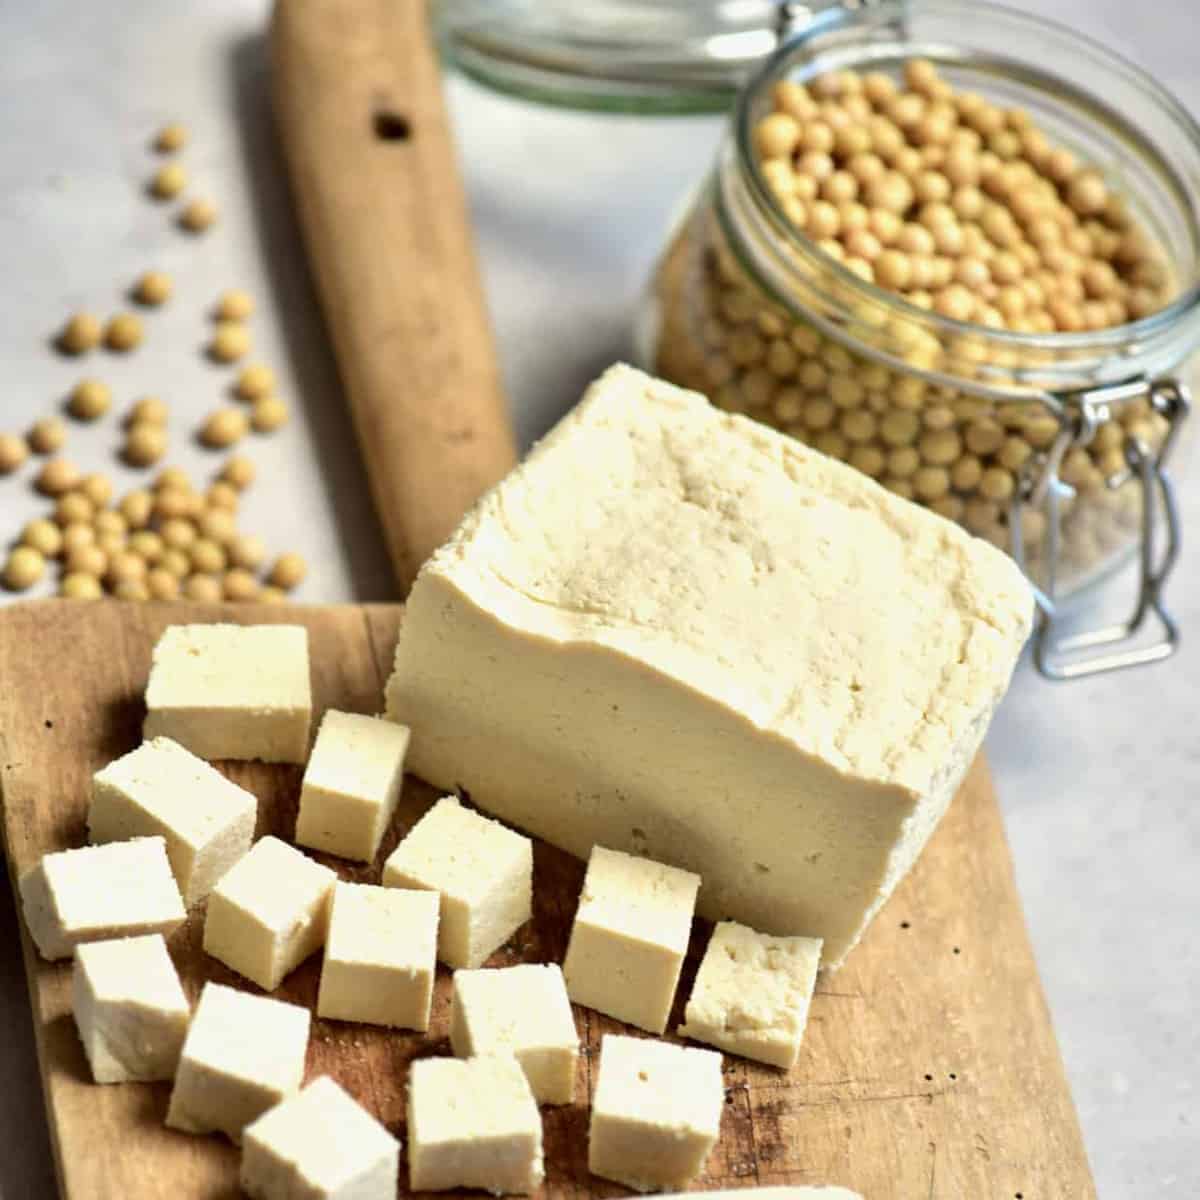 Super-Firm vs Extra-Firm Tofu: What's The Difference? - Plant